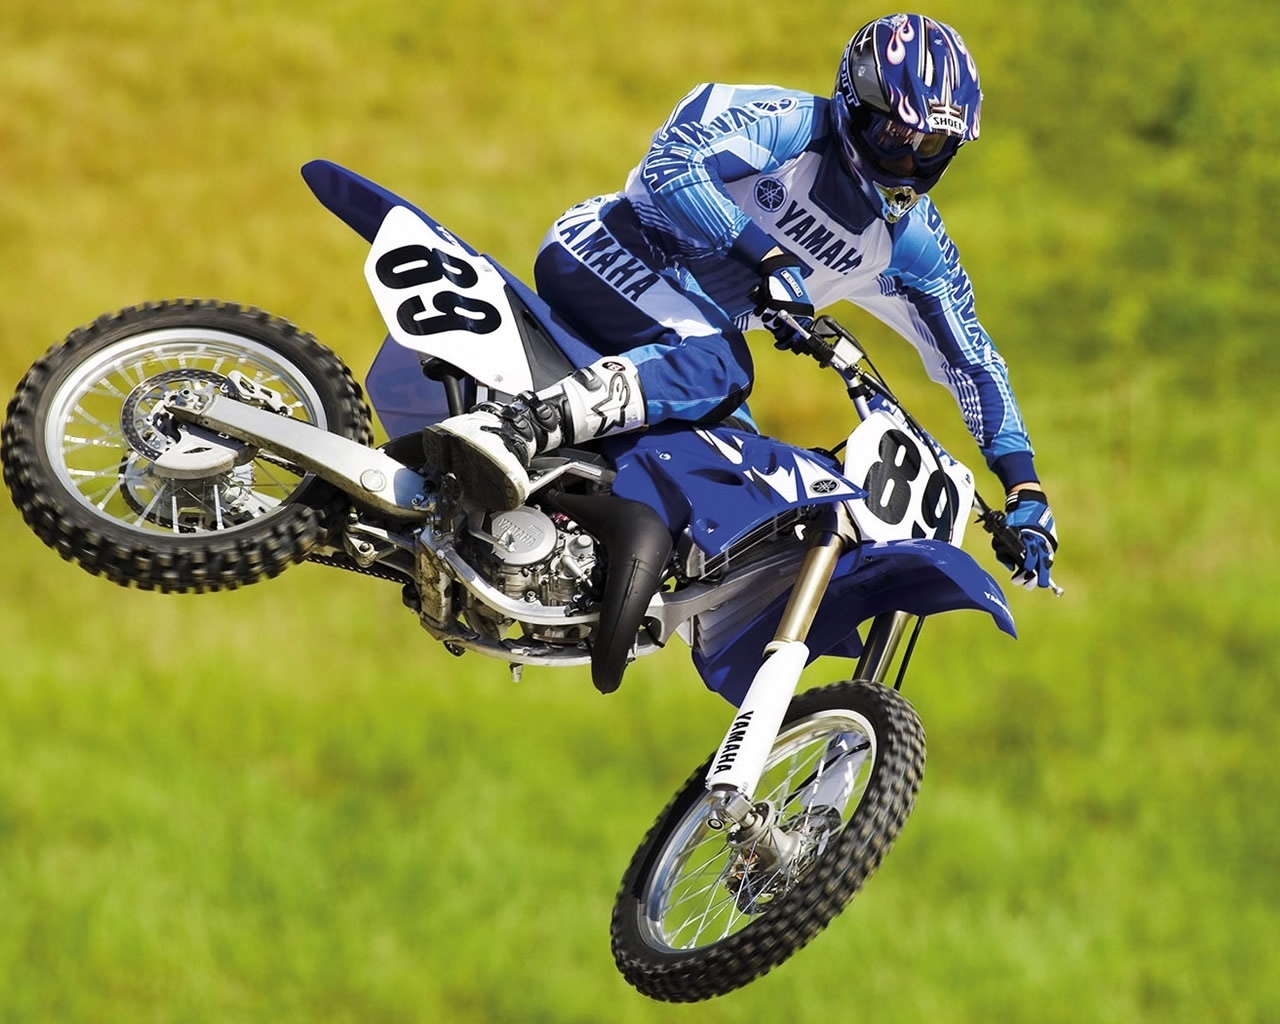 High Quality Motocross for 1280 x 1024 resolution